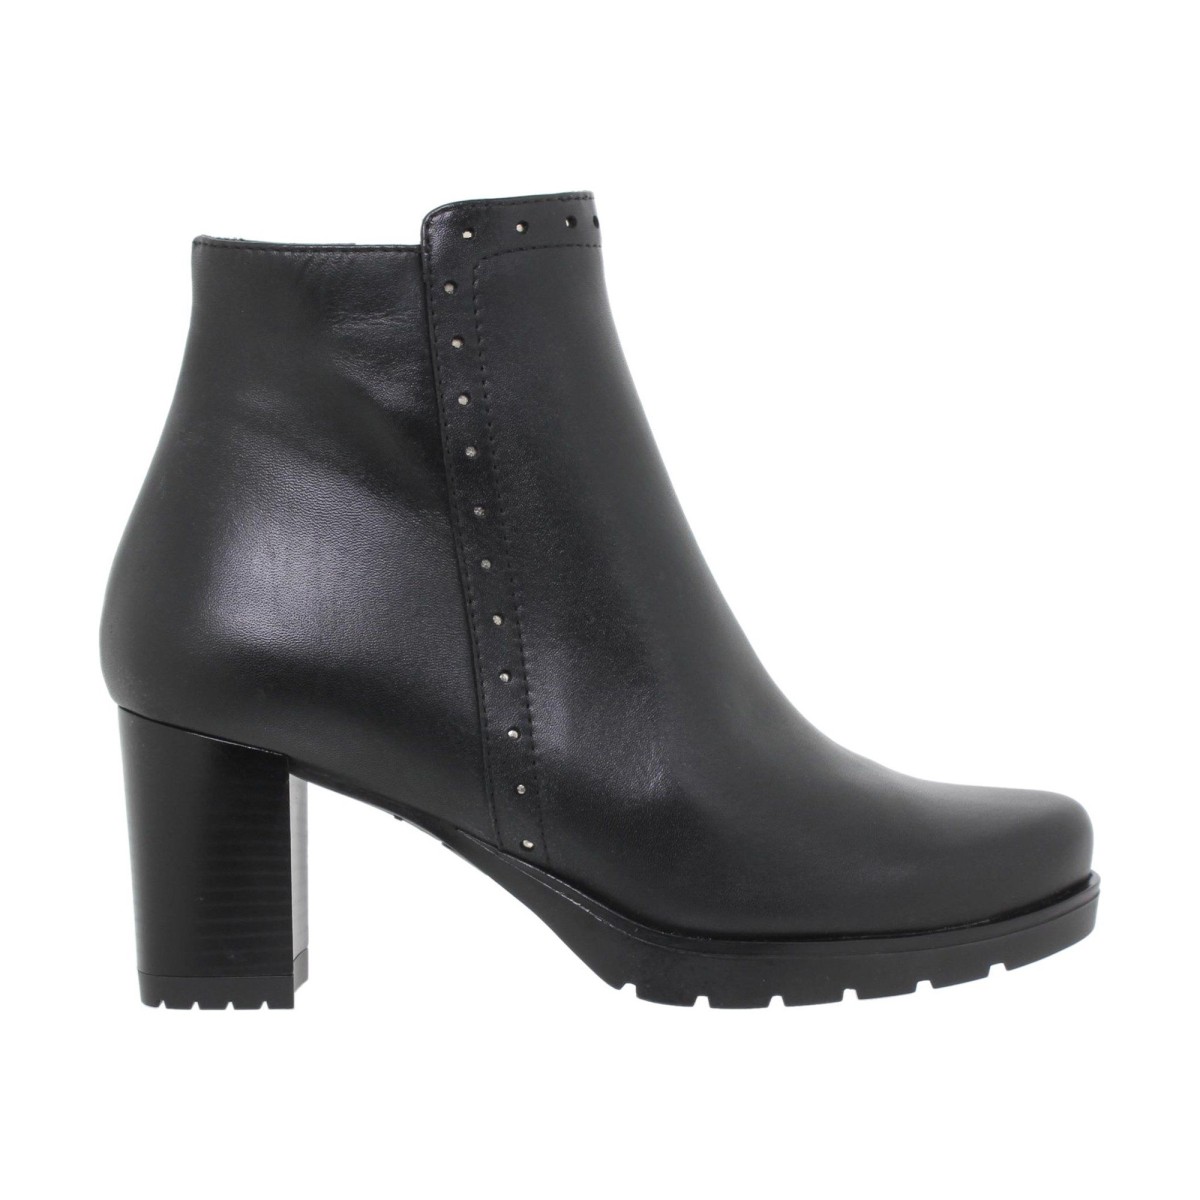 Leather Ankle boots by Desiree 
Manufactured and designed in Spain.
Made of cow leather.